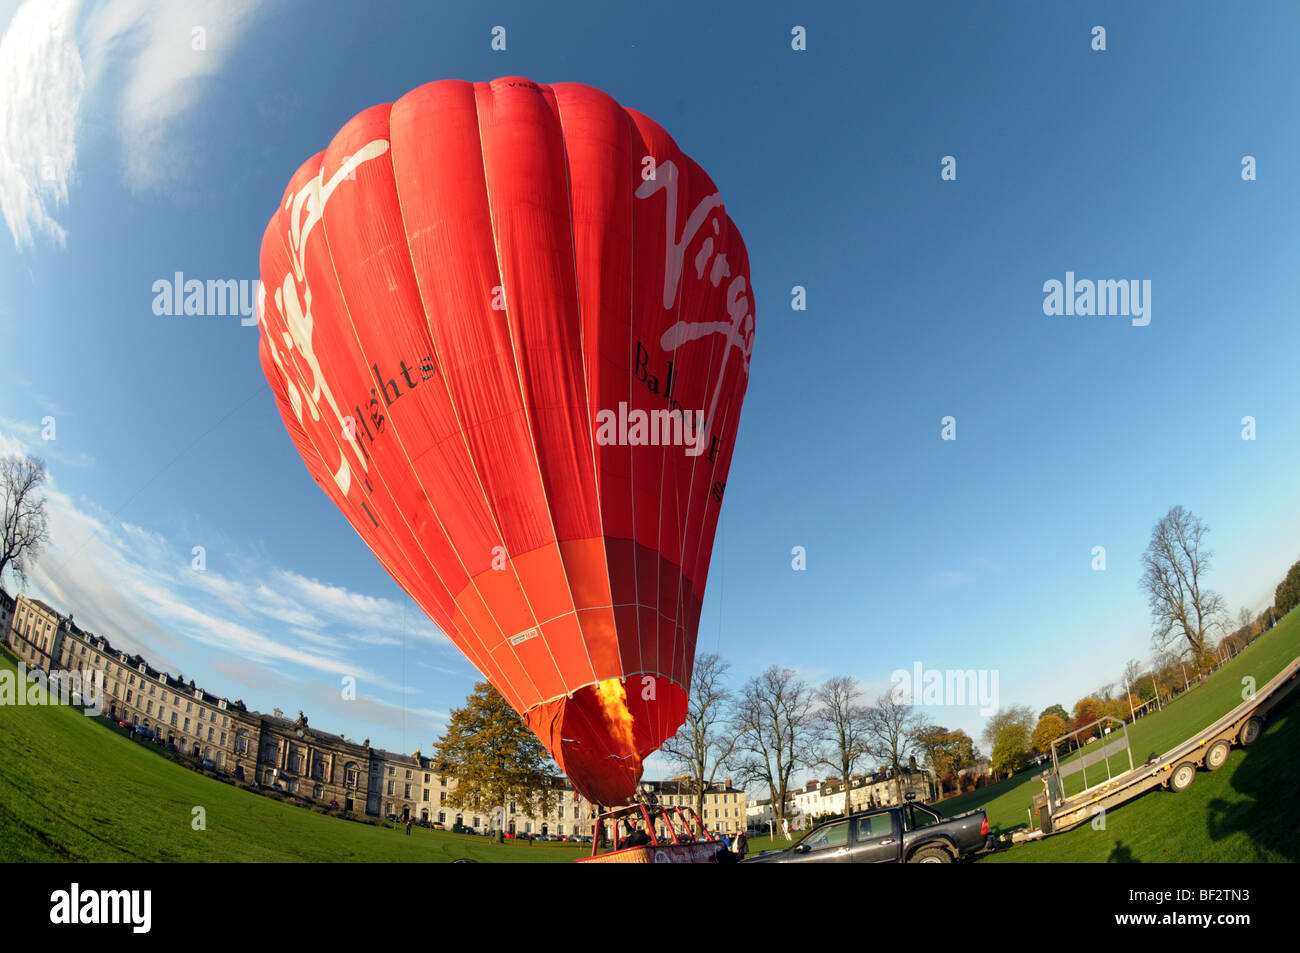 Wide angle view of hot air balloon being inflated before take off. Stock Photo